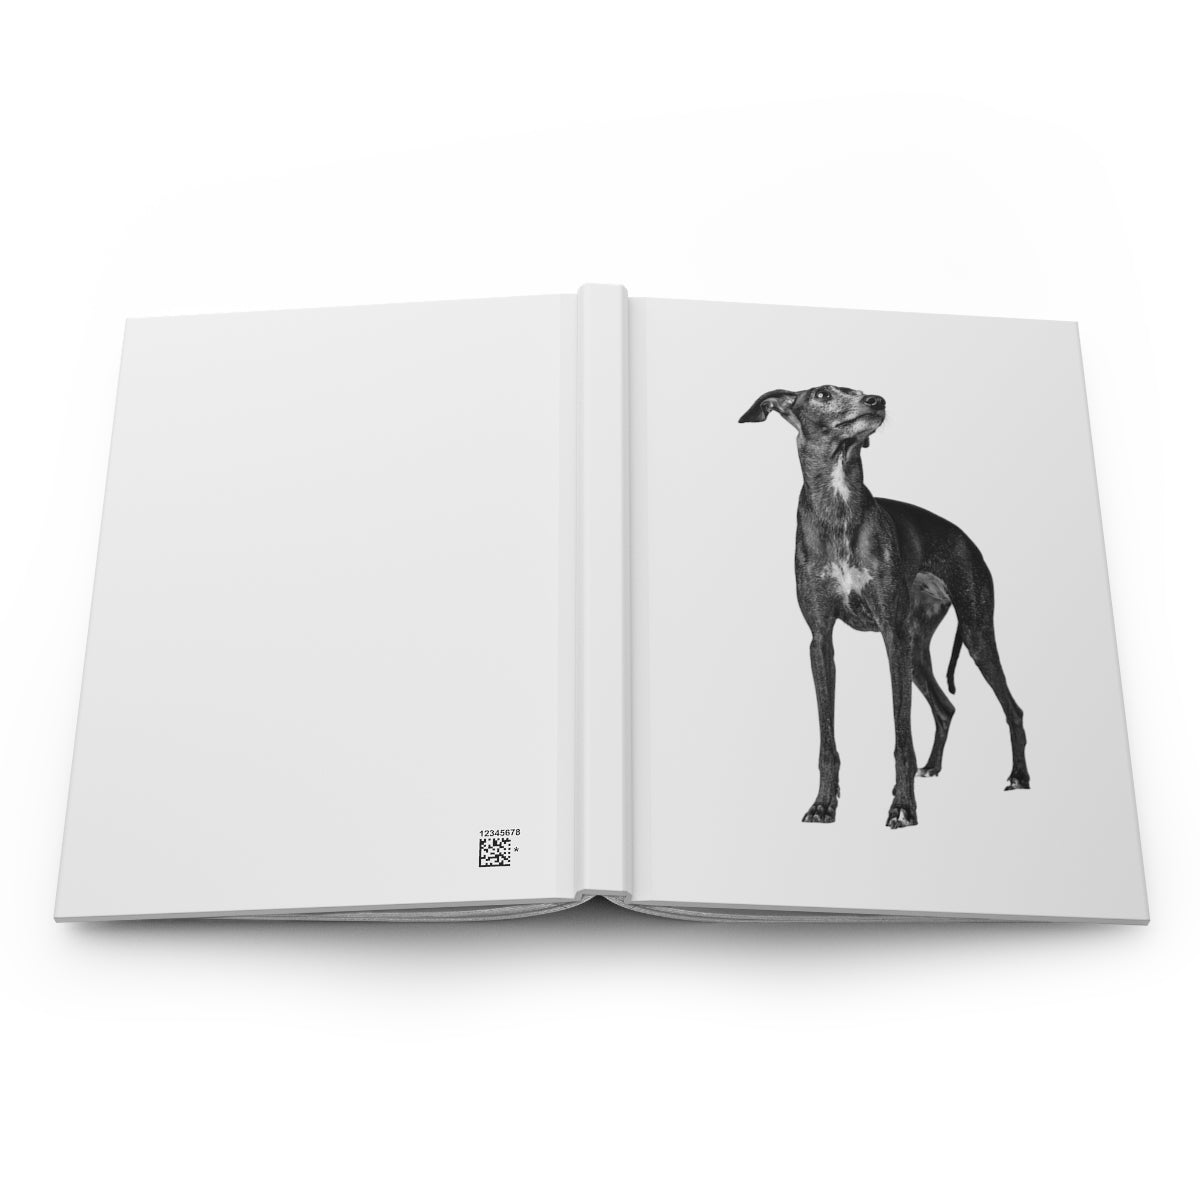 Black Dog Notebook, Hard Cover Notebook, Dotted Paper Journal, Black Dog,, Lined Notebook, Lined Journal, Stationary, Empowerment Journal - The Good Life Vibe